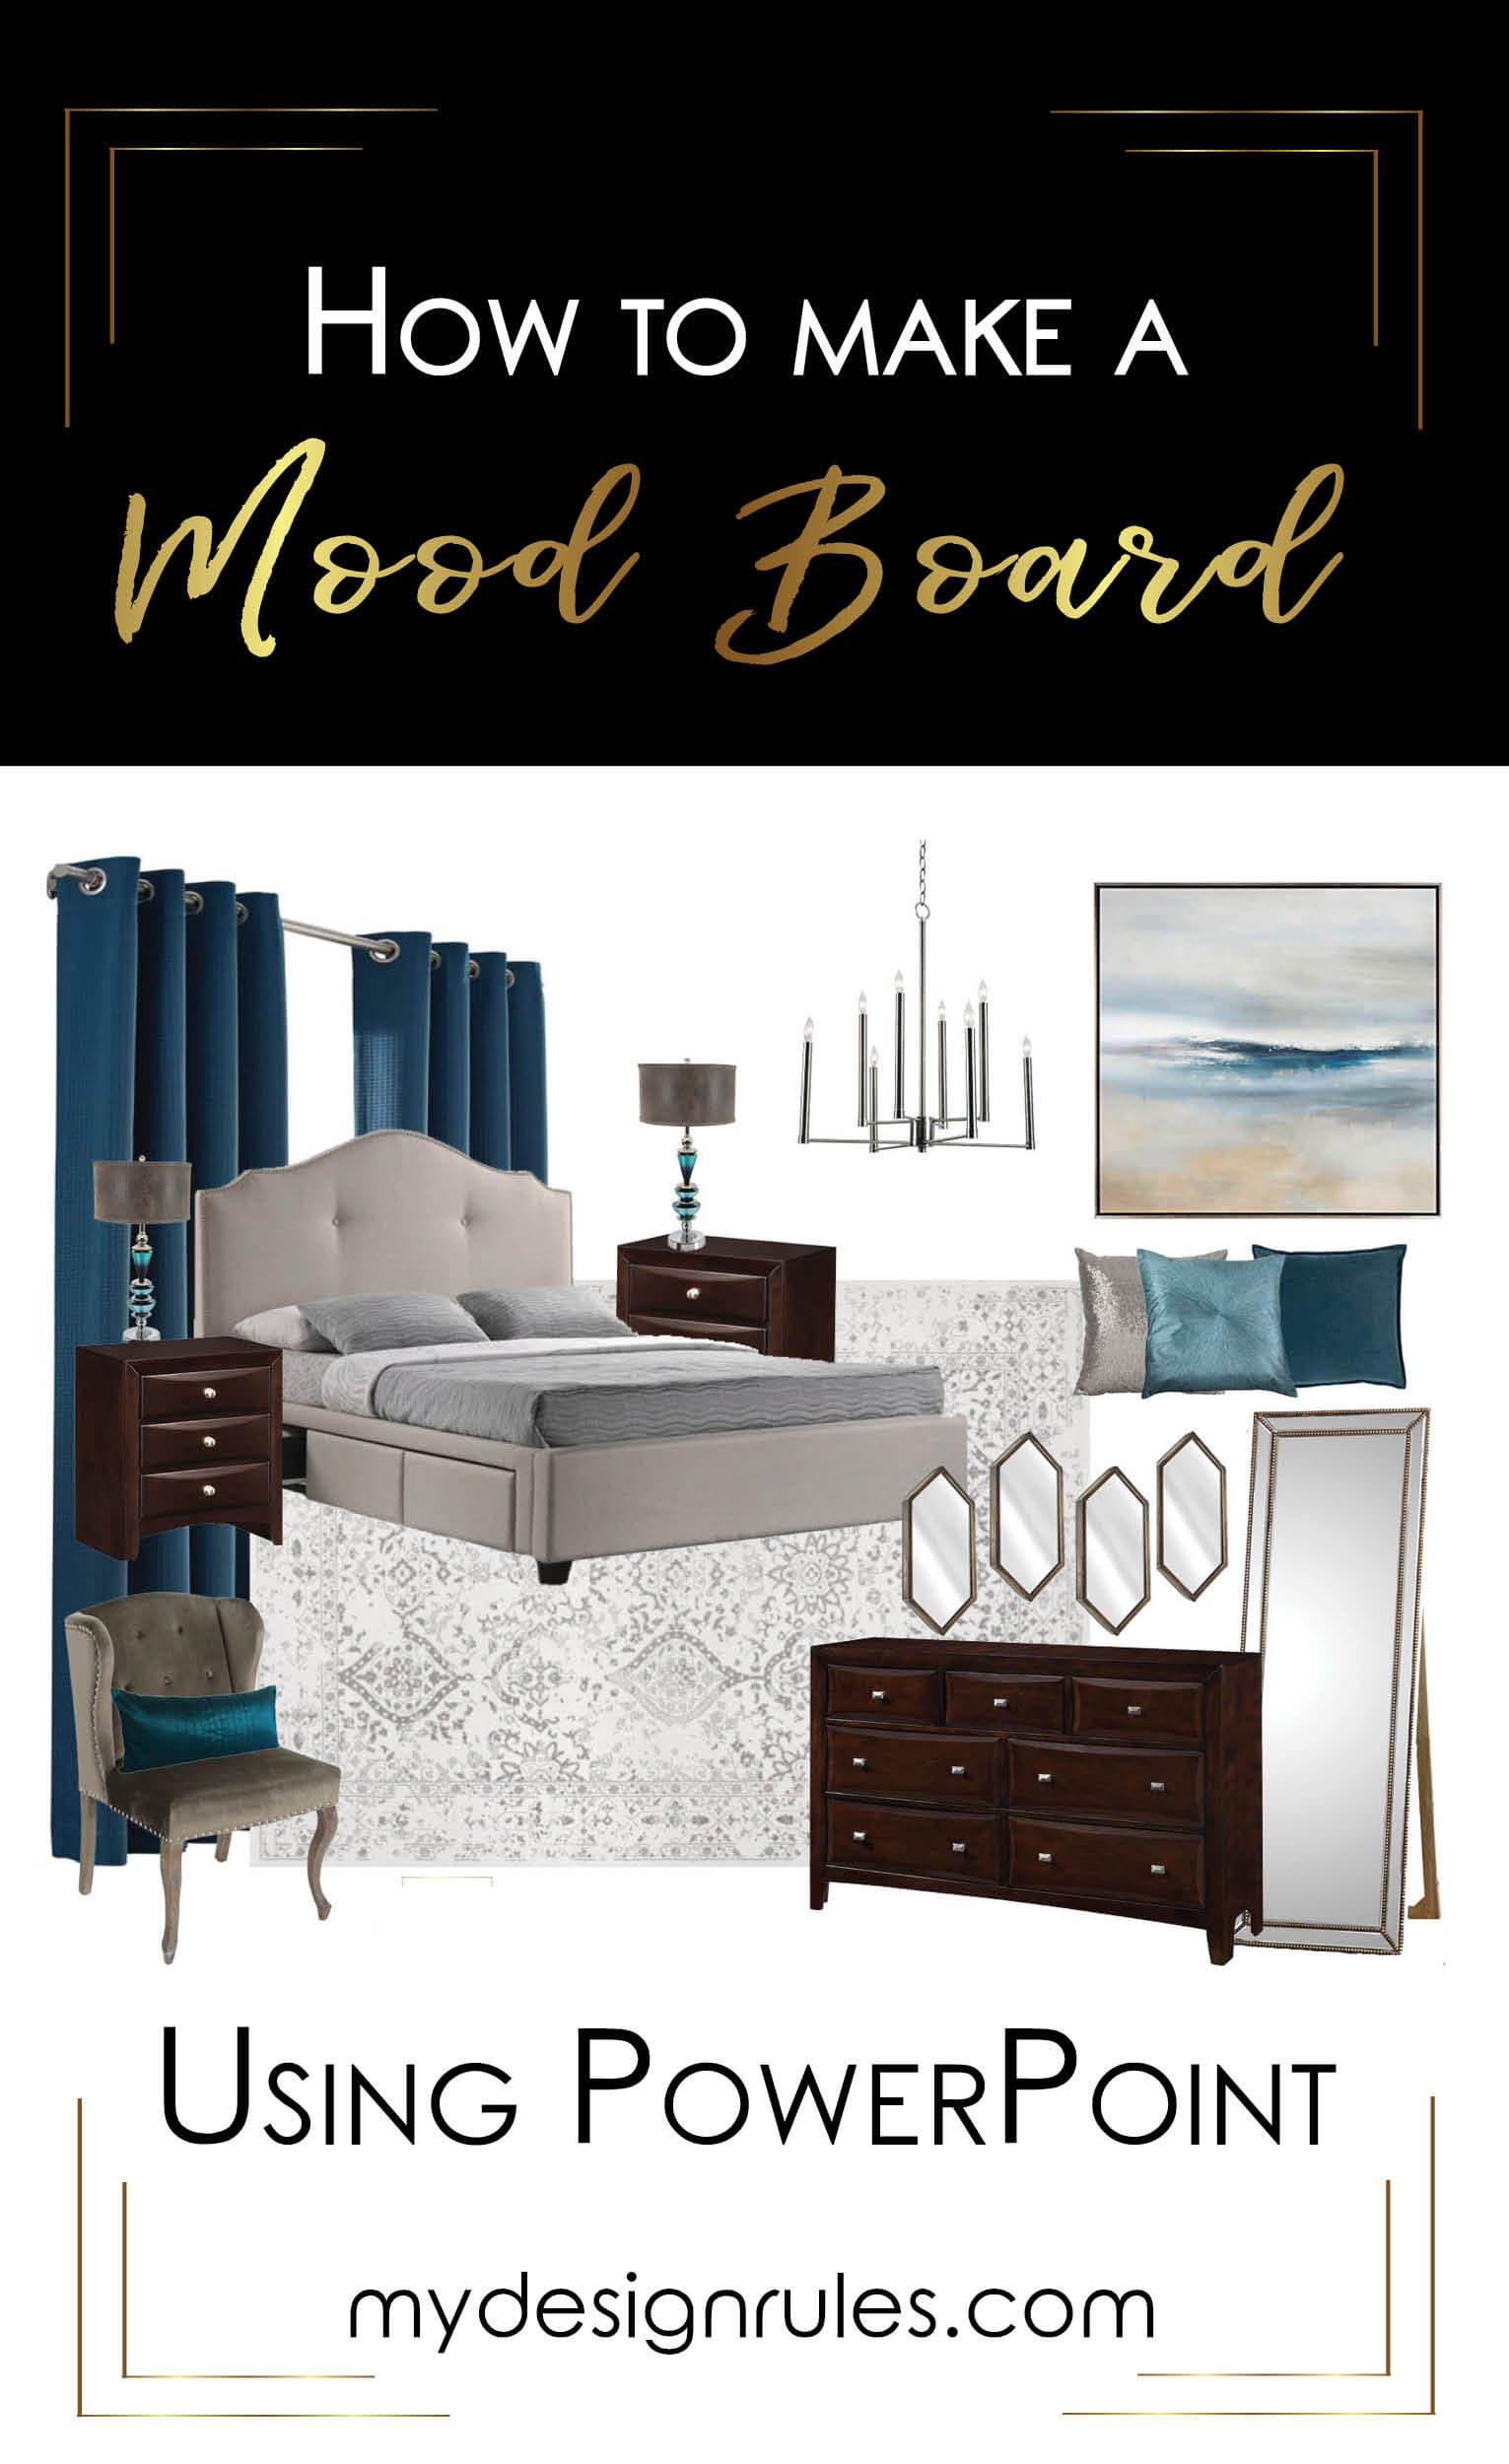 Easy moodboard tutorial for creating a beautiful bedroom with Power Point. #moodboard #designer #decorate #DIY